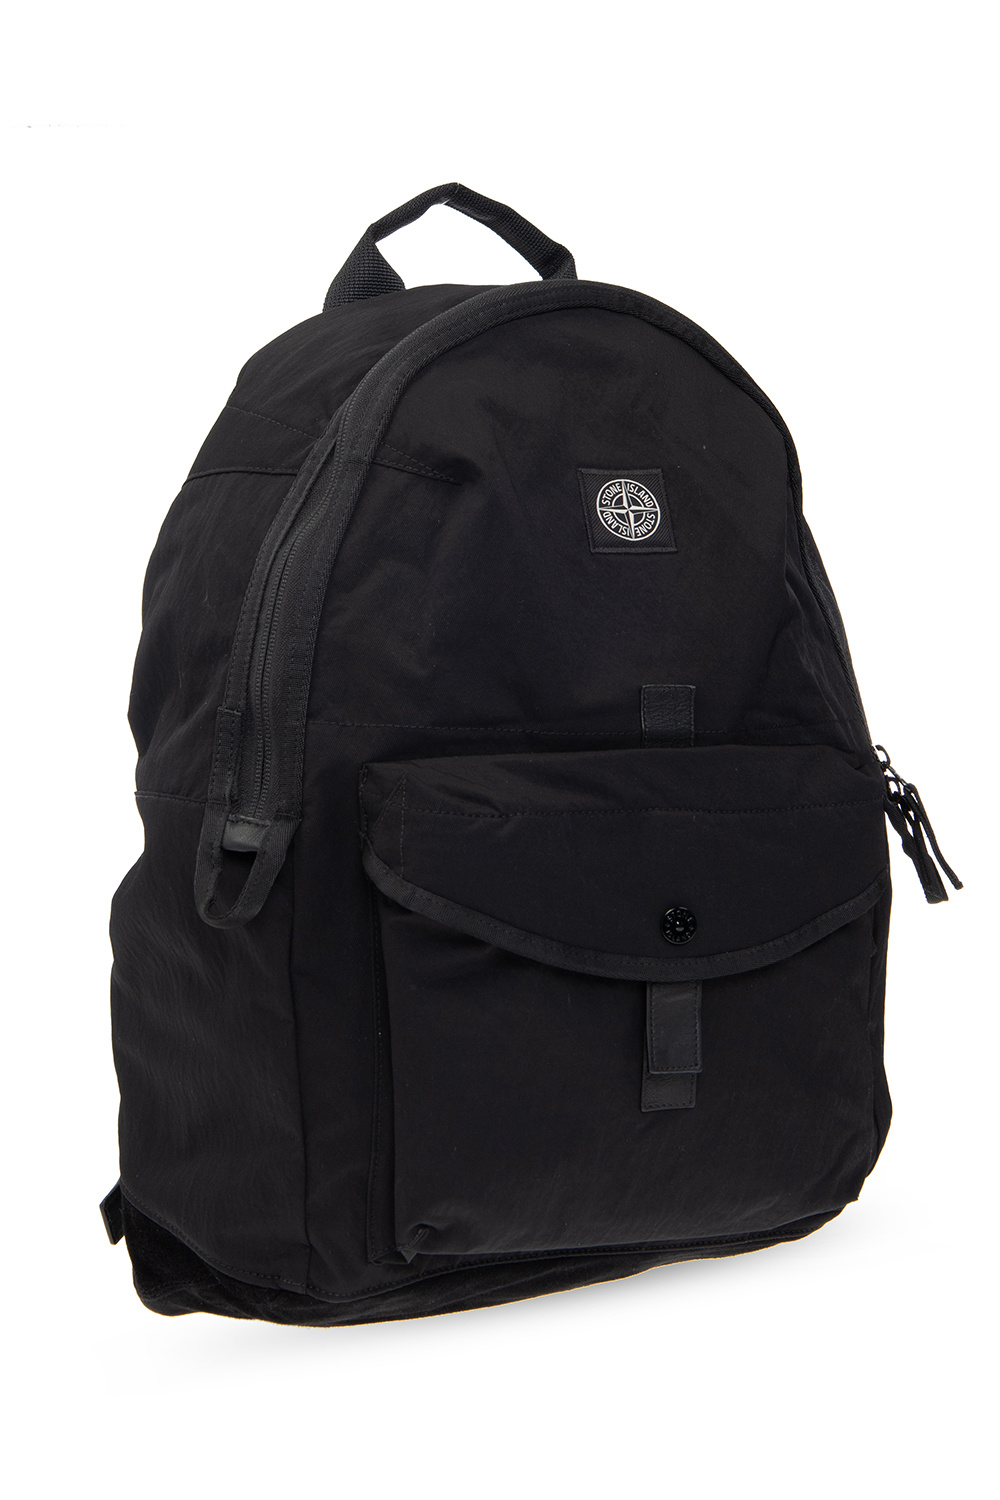 Stone Island Backpack with logo | Men's Bags | IetpShops